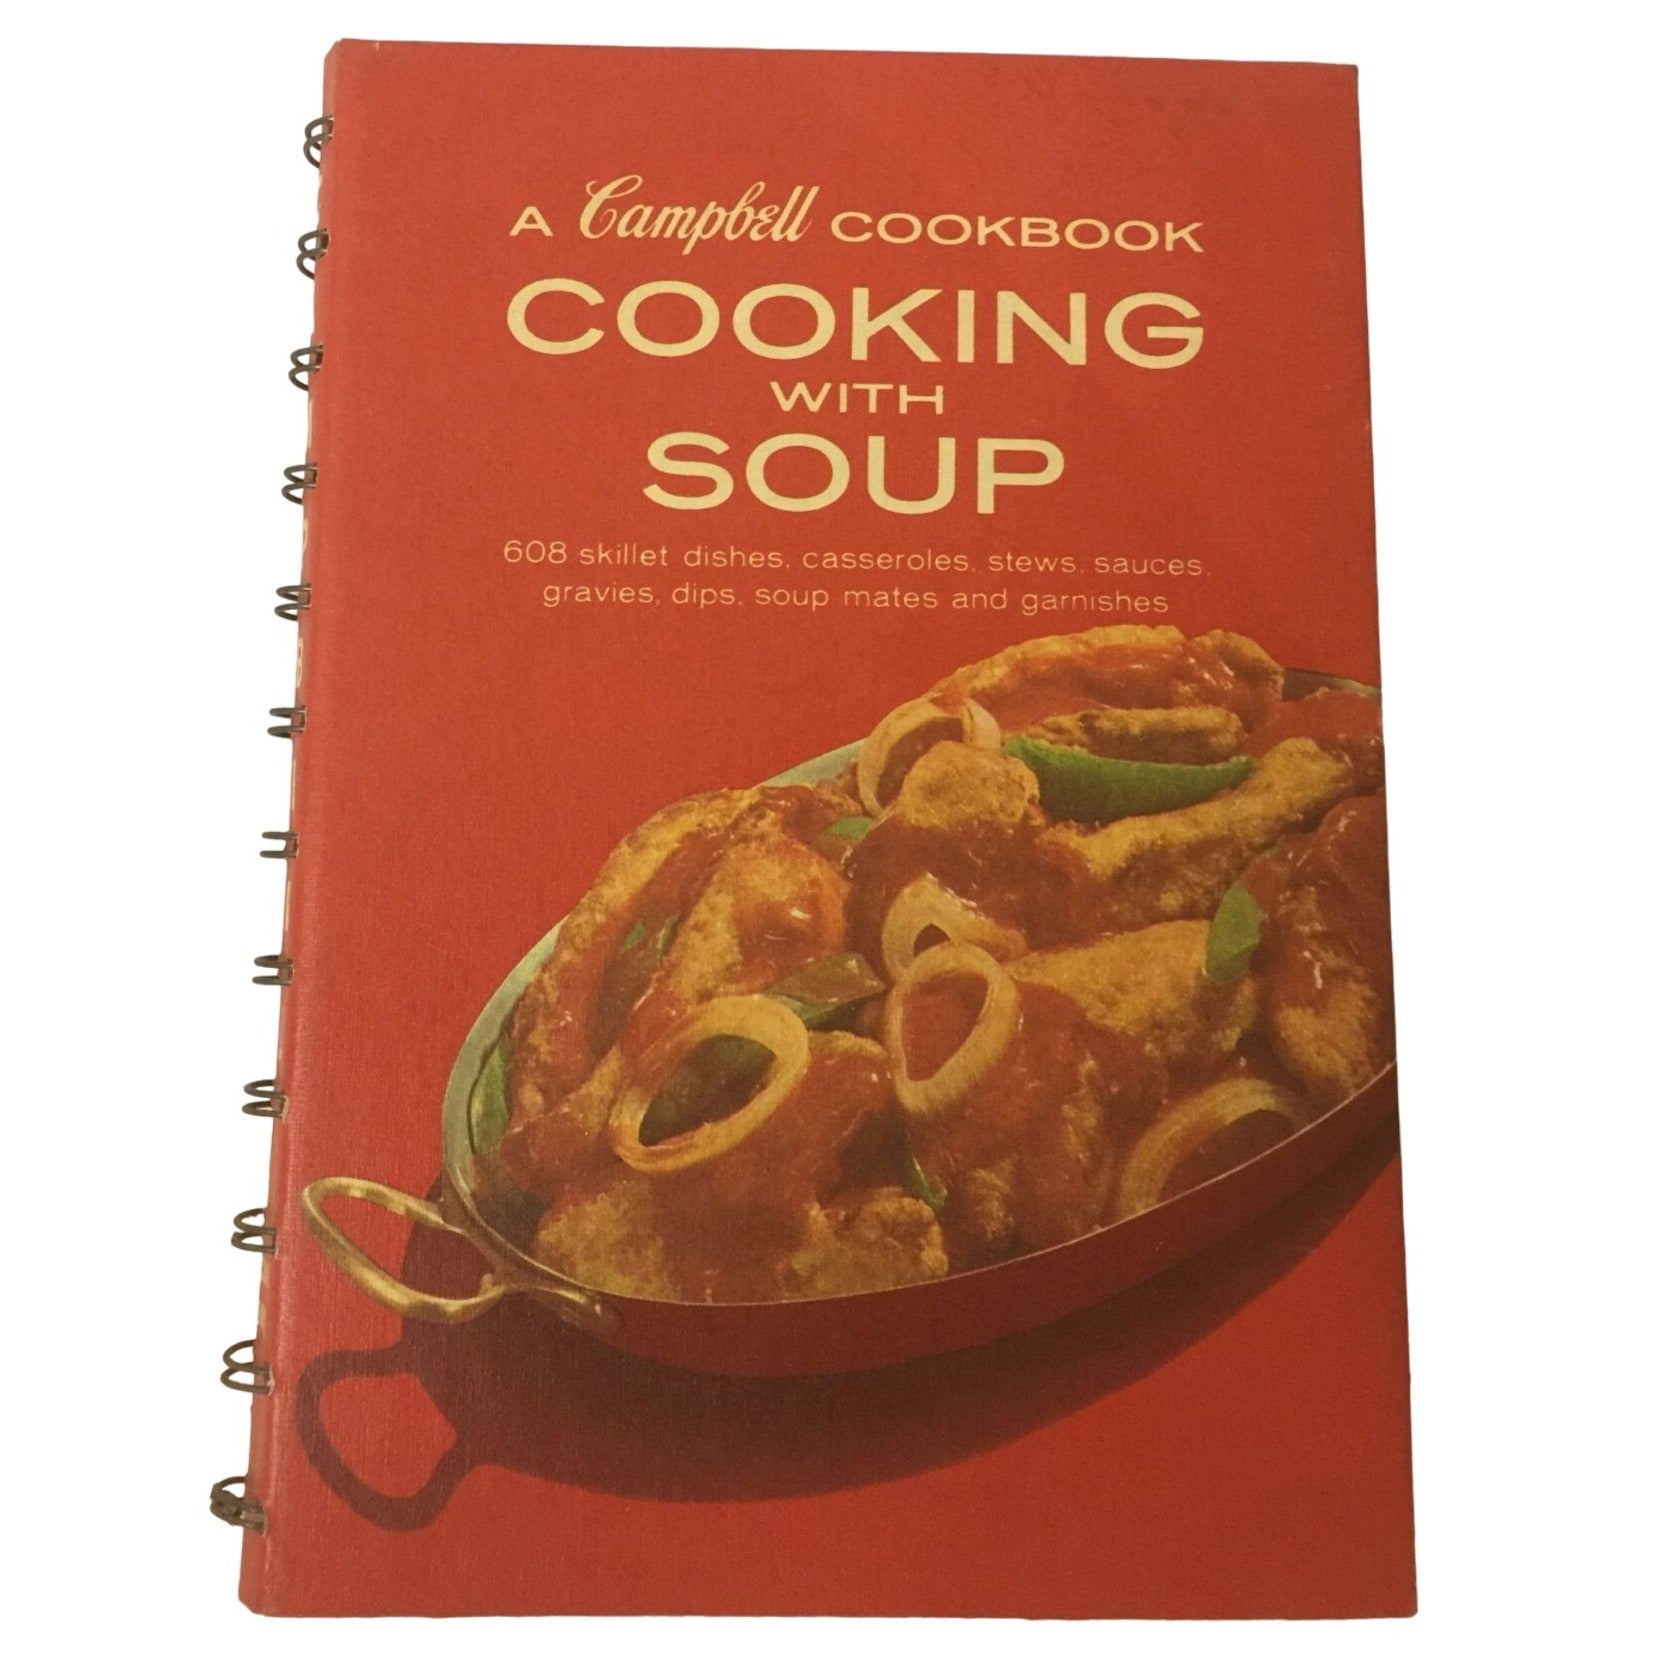 A Campbell Cookbook - Cooking with Soup (608 Recipes)